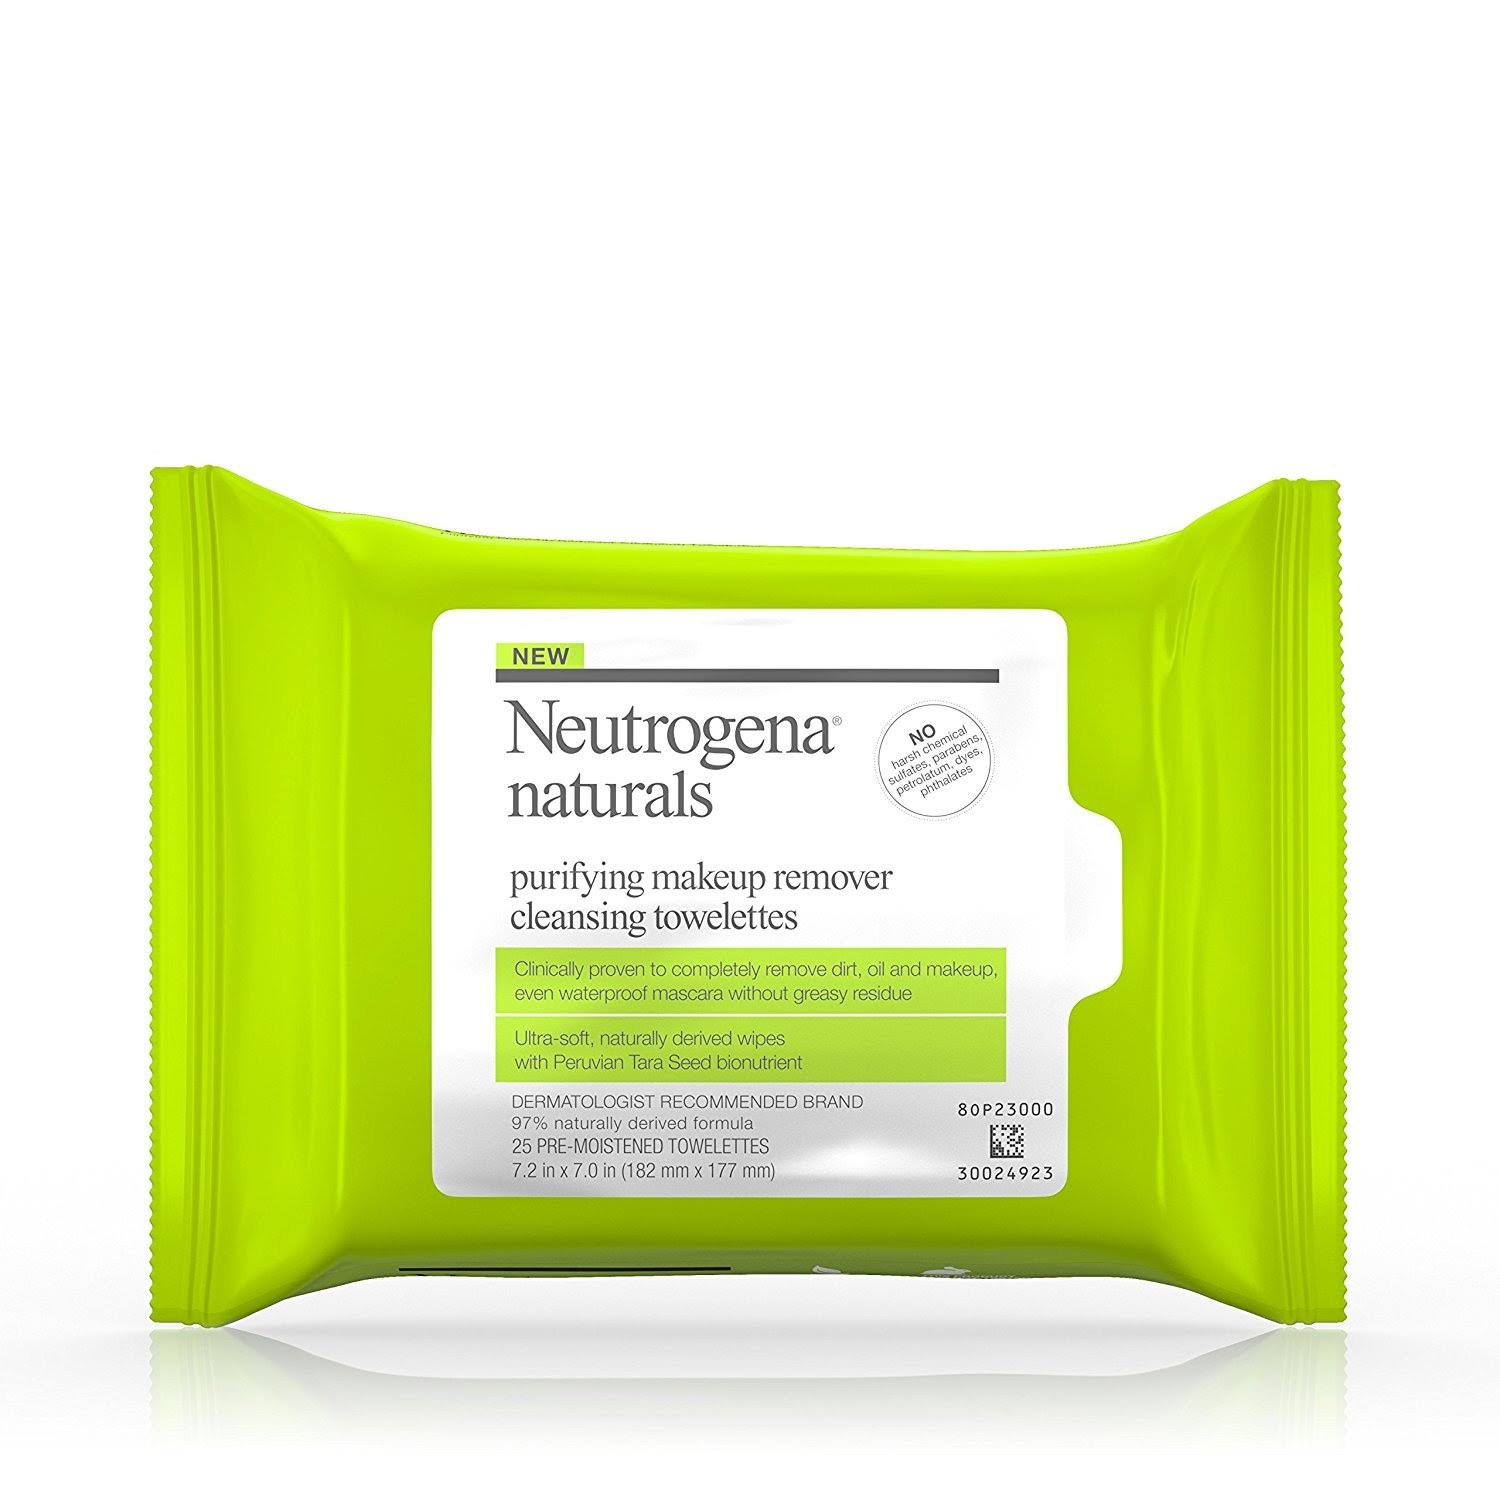 Neutrogena Naturals Purifying Makeup Remover Cleansing Pre-Moistened Towelettes - x25